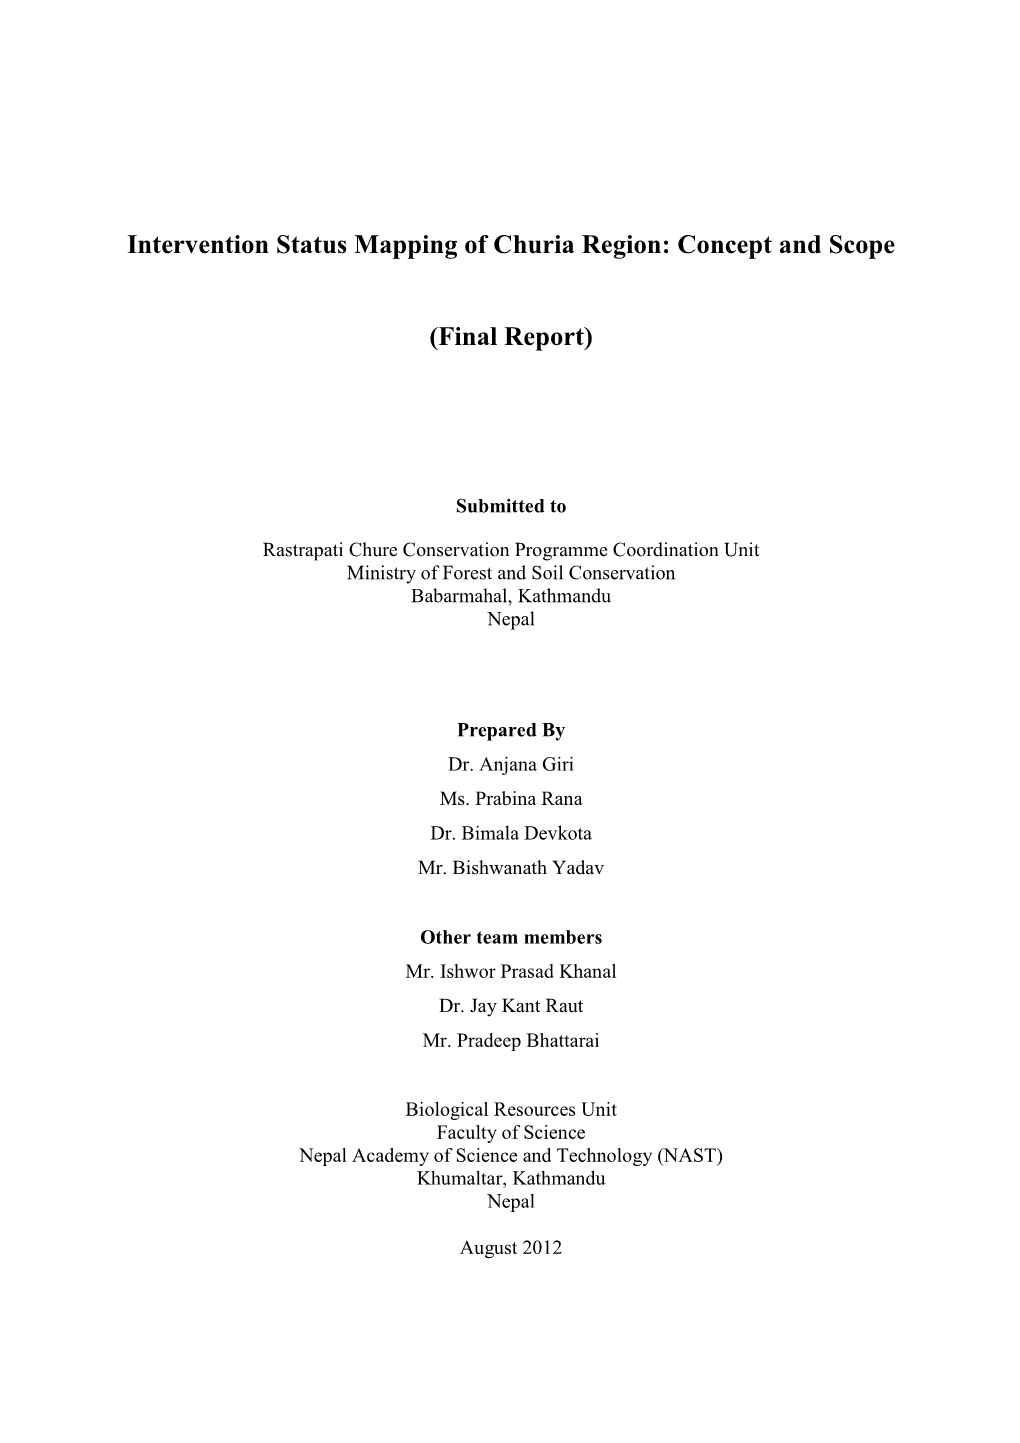 Intervention Status Mapping of Churia Region: Concept and Scope